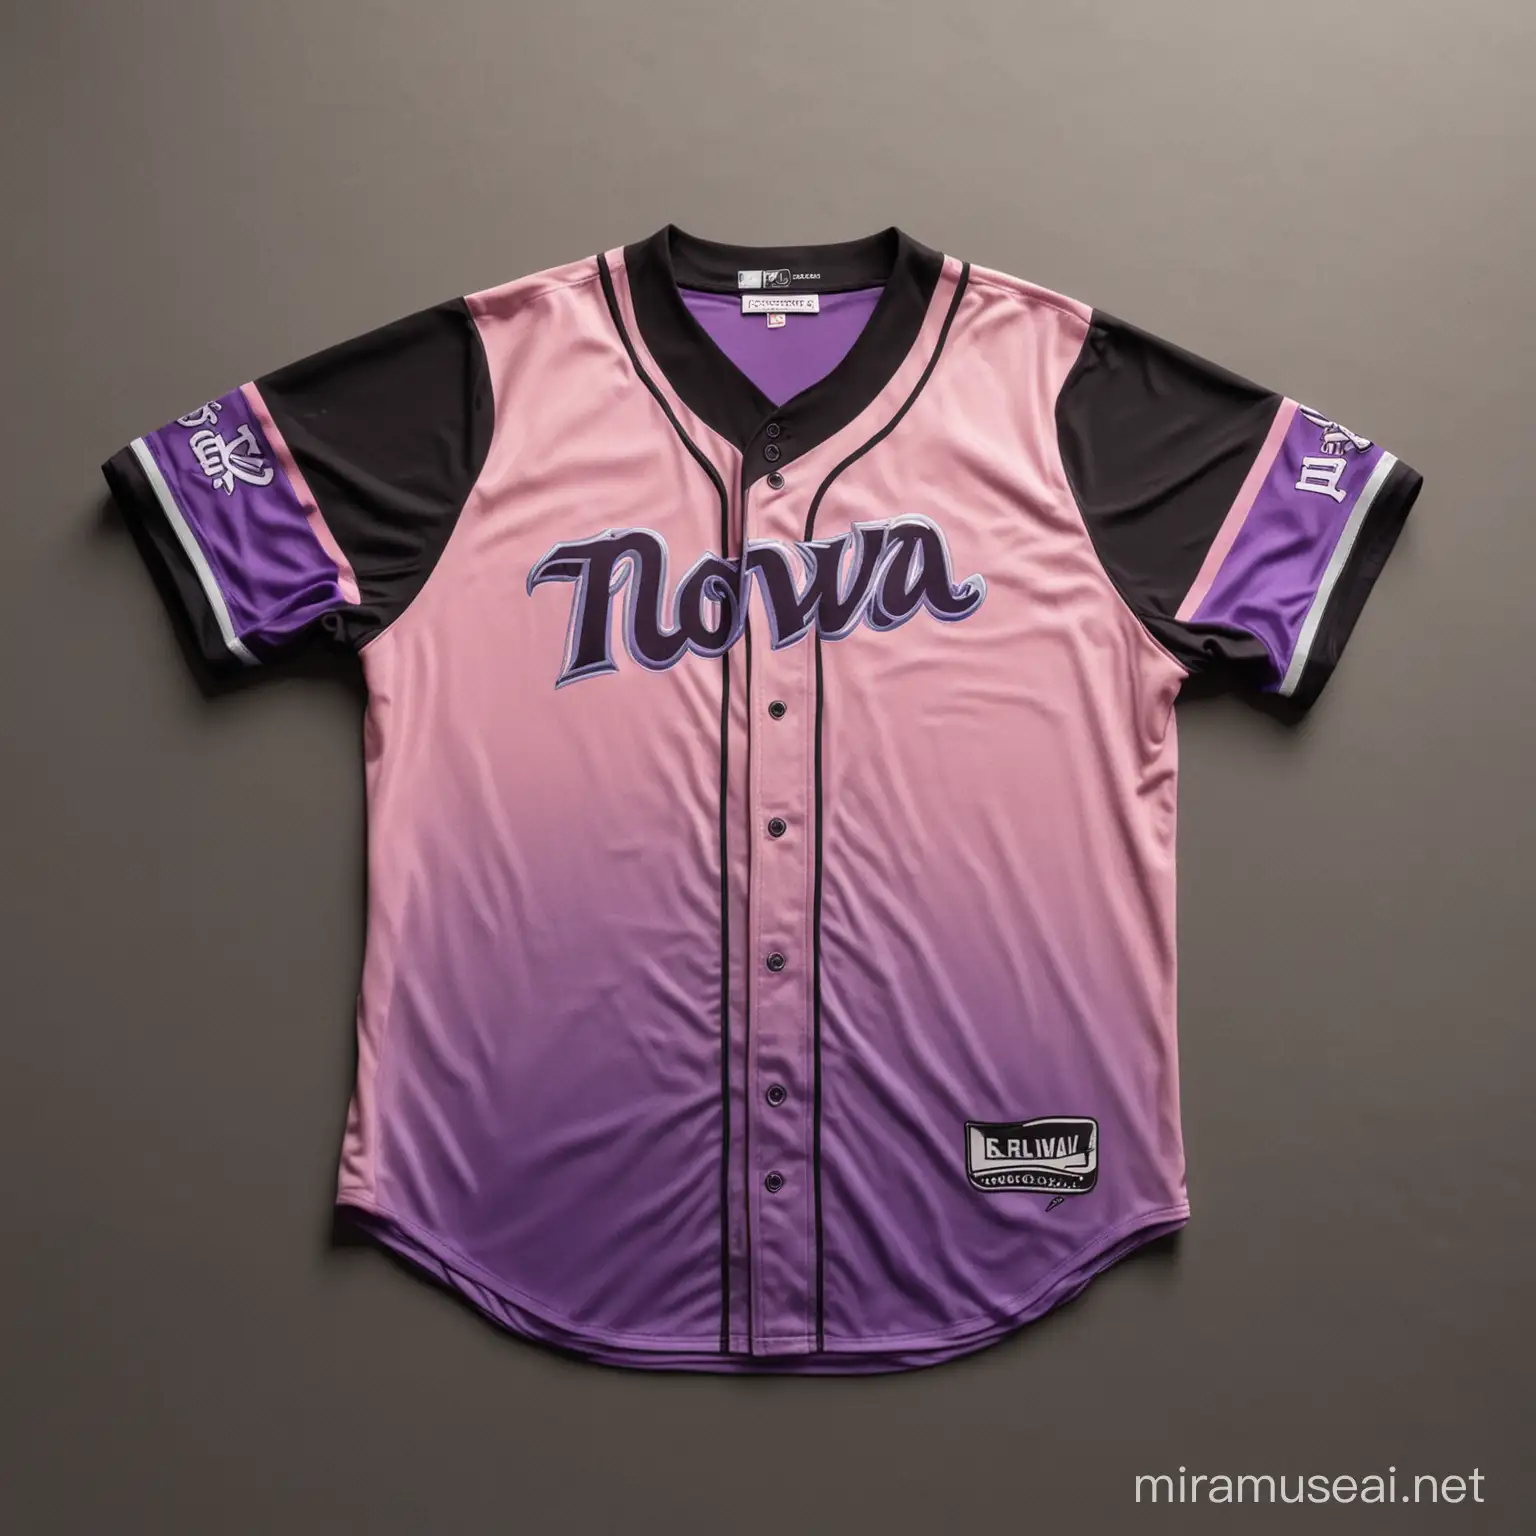 A baseball jersey with the name nova, with a black base and light pink and purple accent colors with a logo and and name